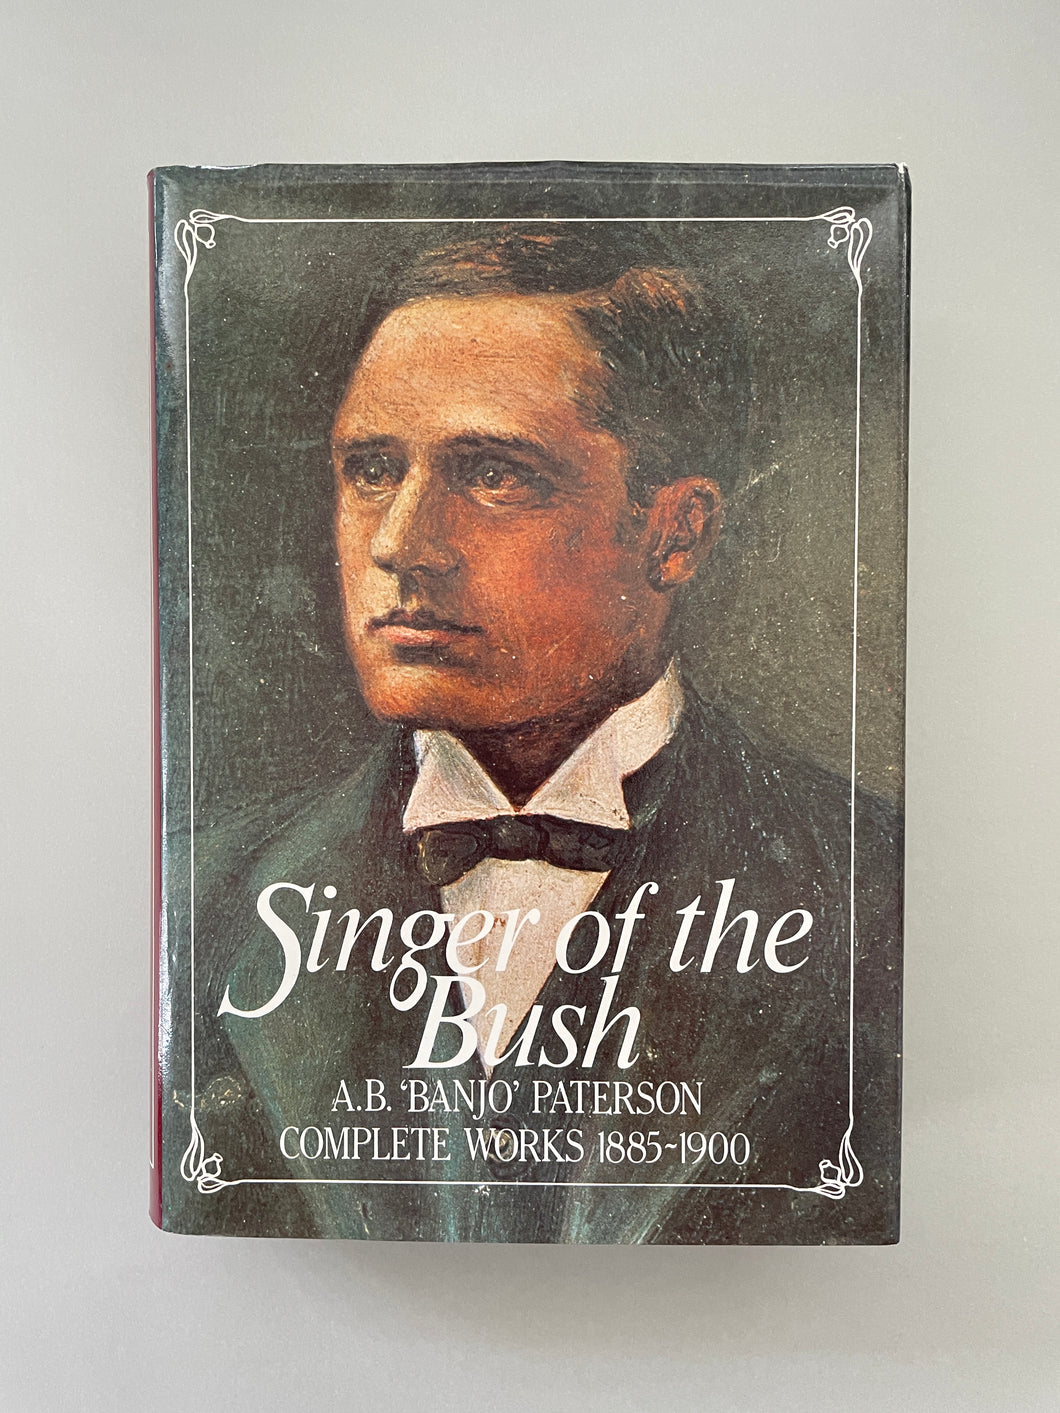 Singer of the Bush by Banjo Paterson: photo of the front cover which shows very minor scuff marks along the edges.